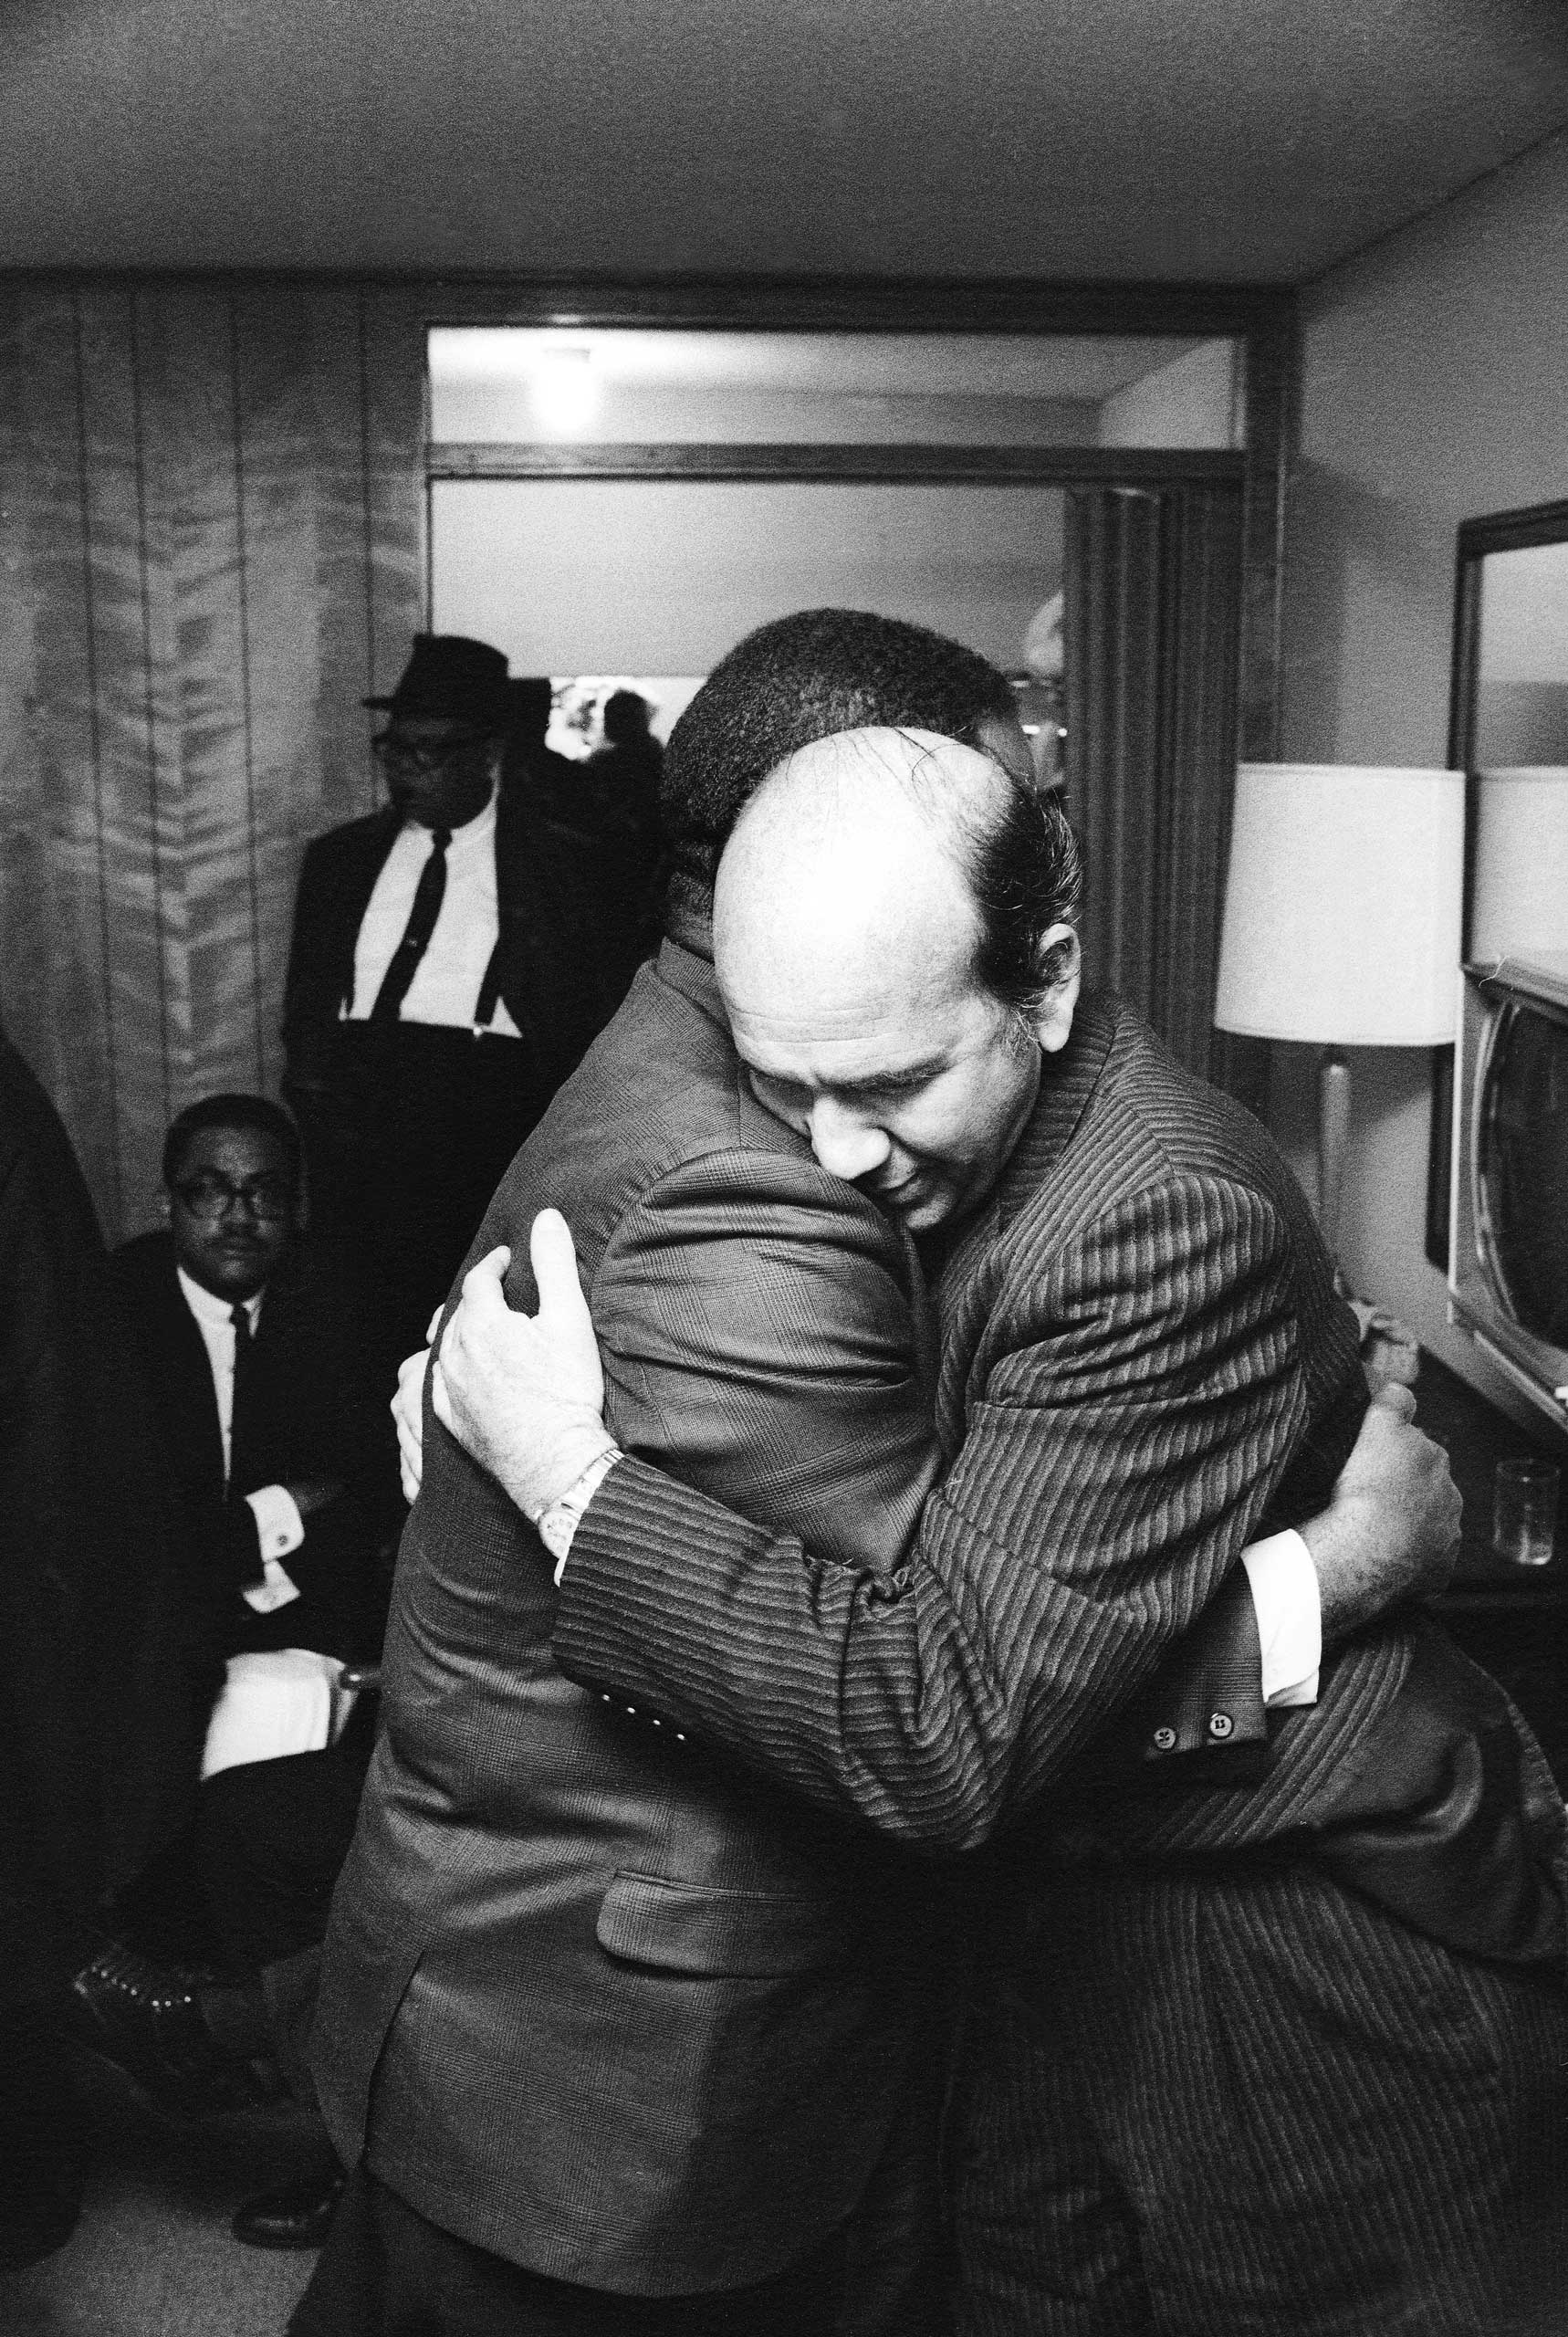 Ralph Abernathy and Will D. Campbell, a long-time friend and civil rights activist, embrace in Dr. King's room. "I was documenting a momentous event," Groskinsky told LIFE.com, "and I thought that at any time I was going to be asked to leave, so I did wh